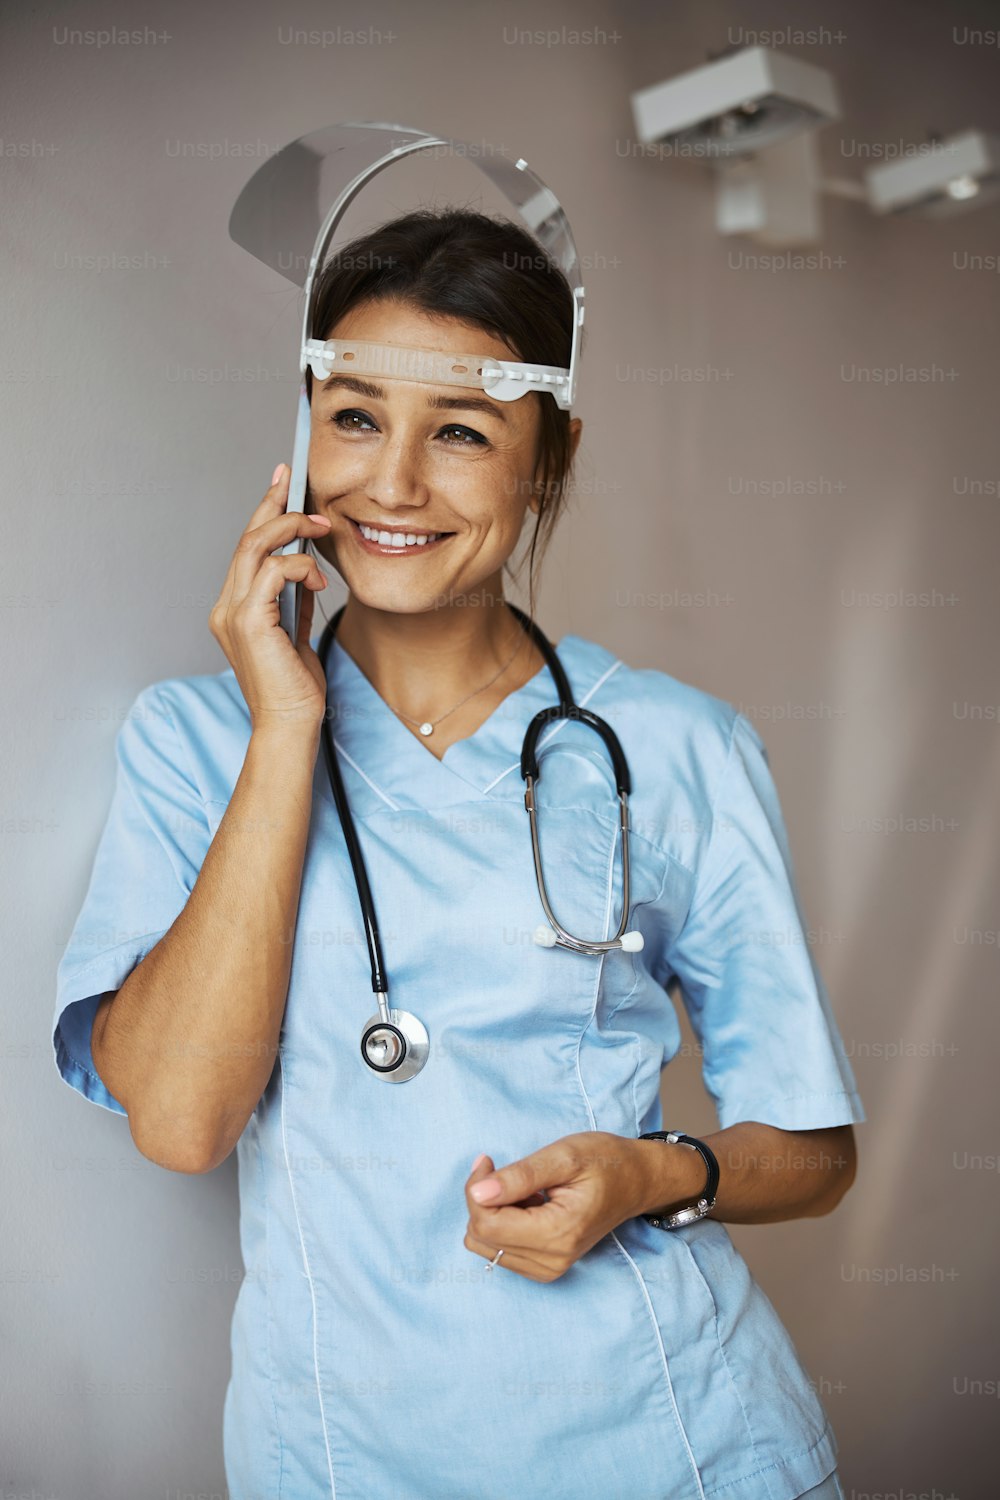 Charming young woman physician wearing protective face mask and medical uniform while having phone conversation and smiling